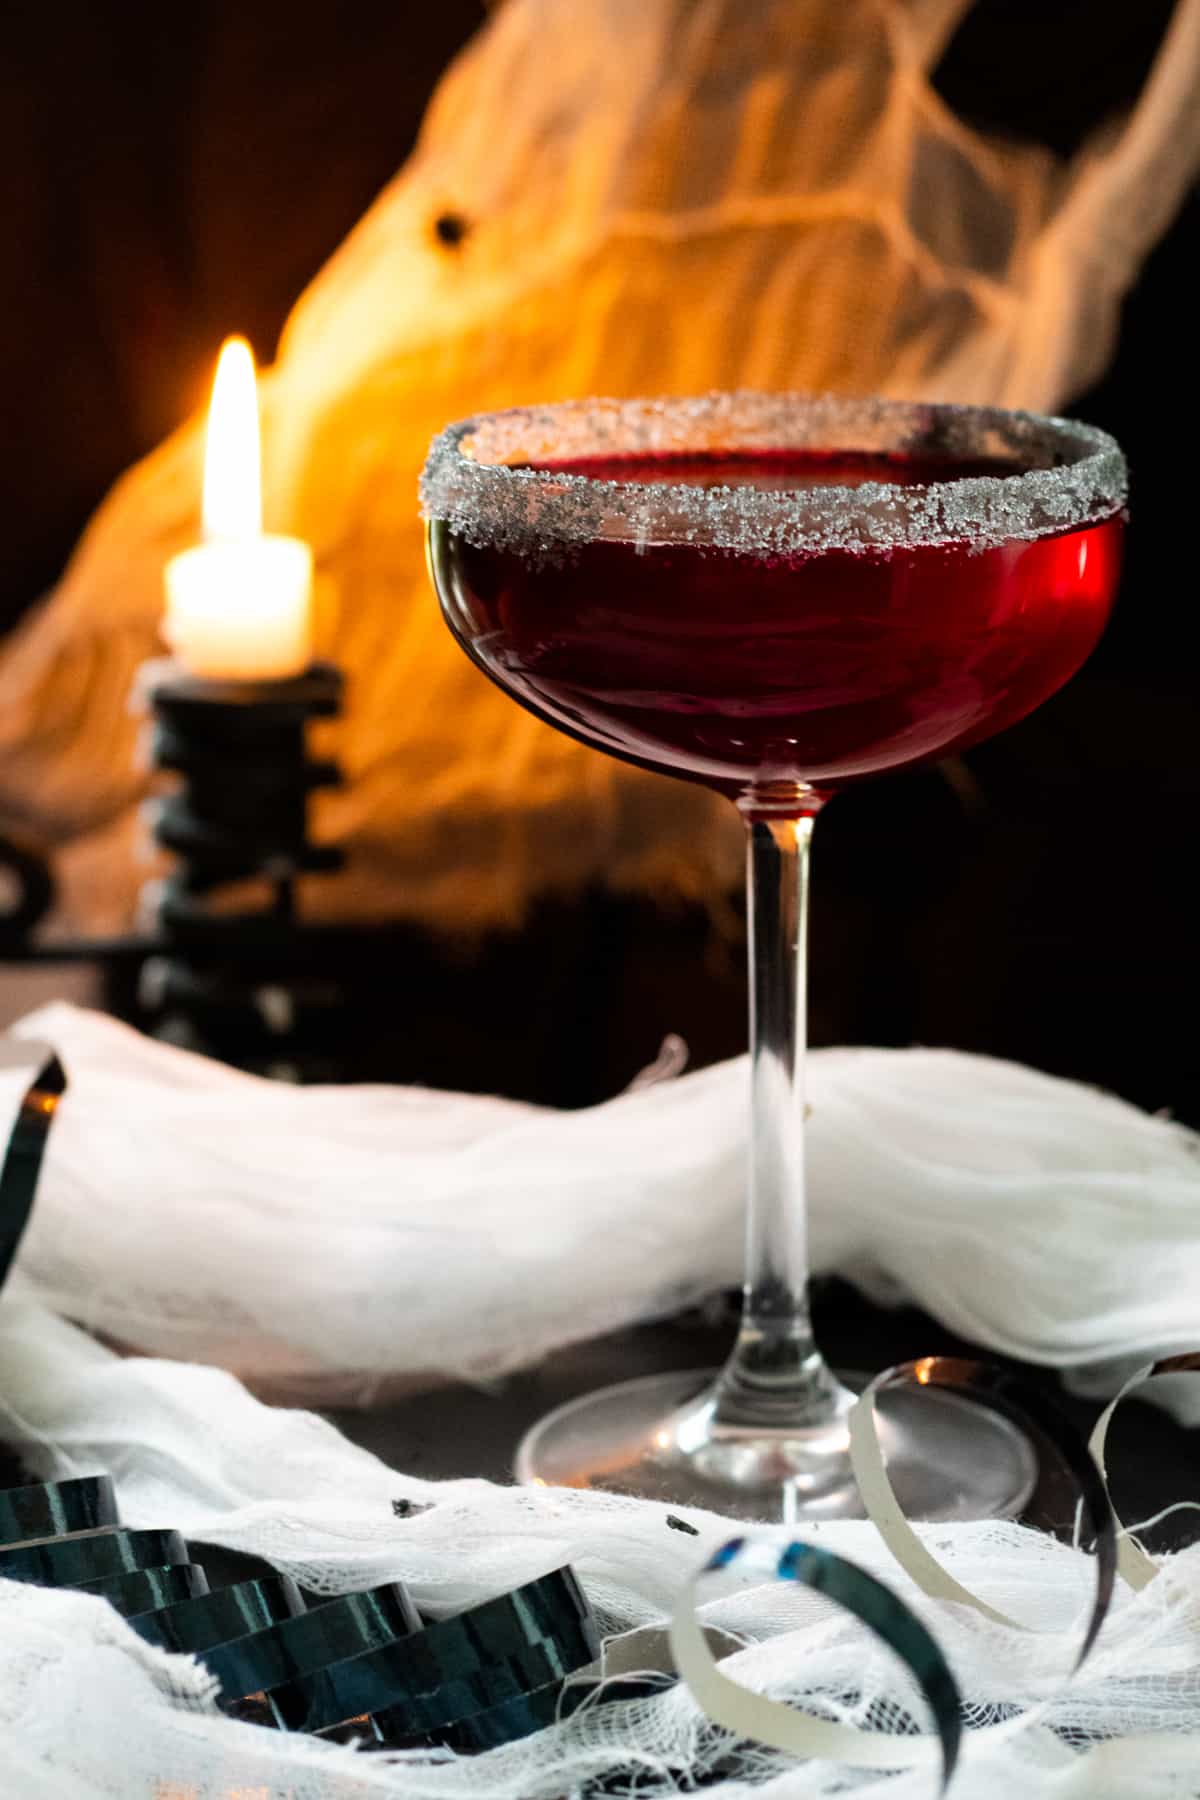 vampire margarita with a candle and cob webs in the background.